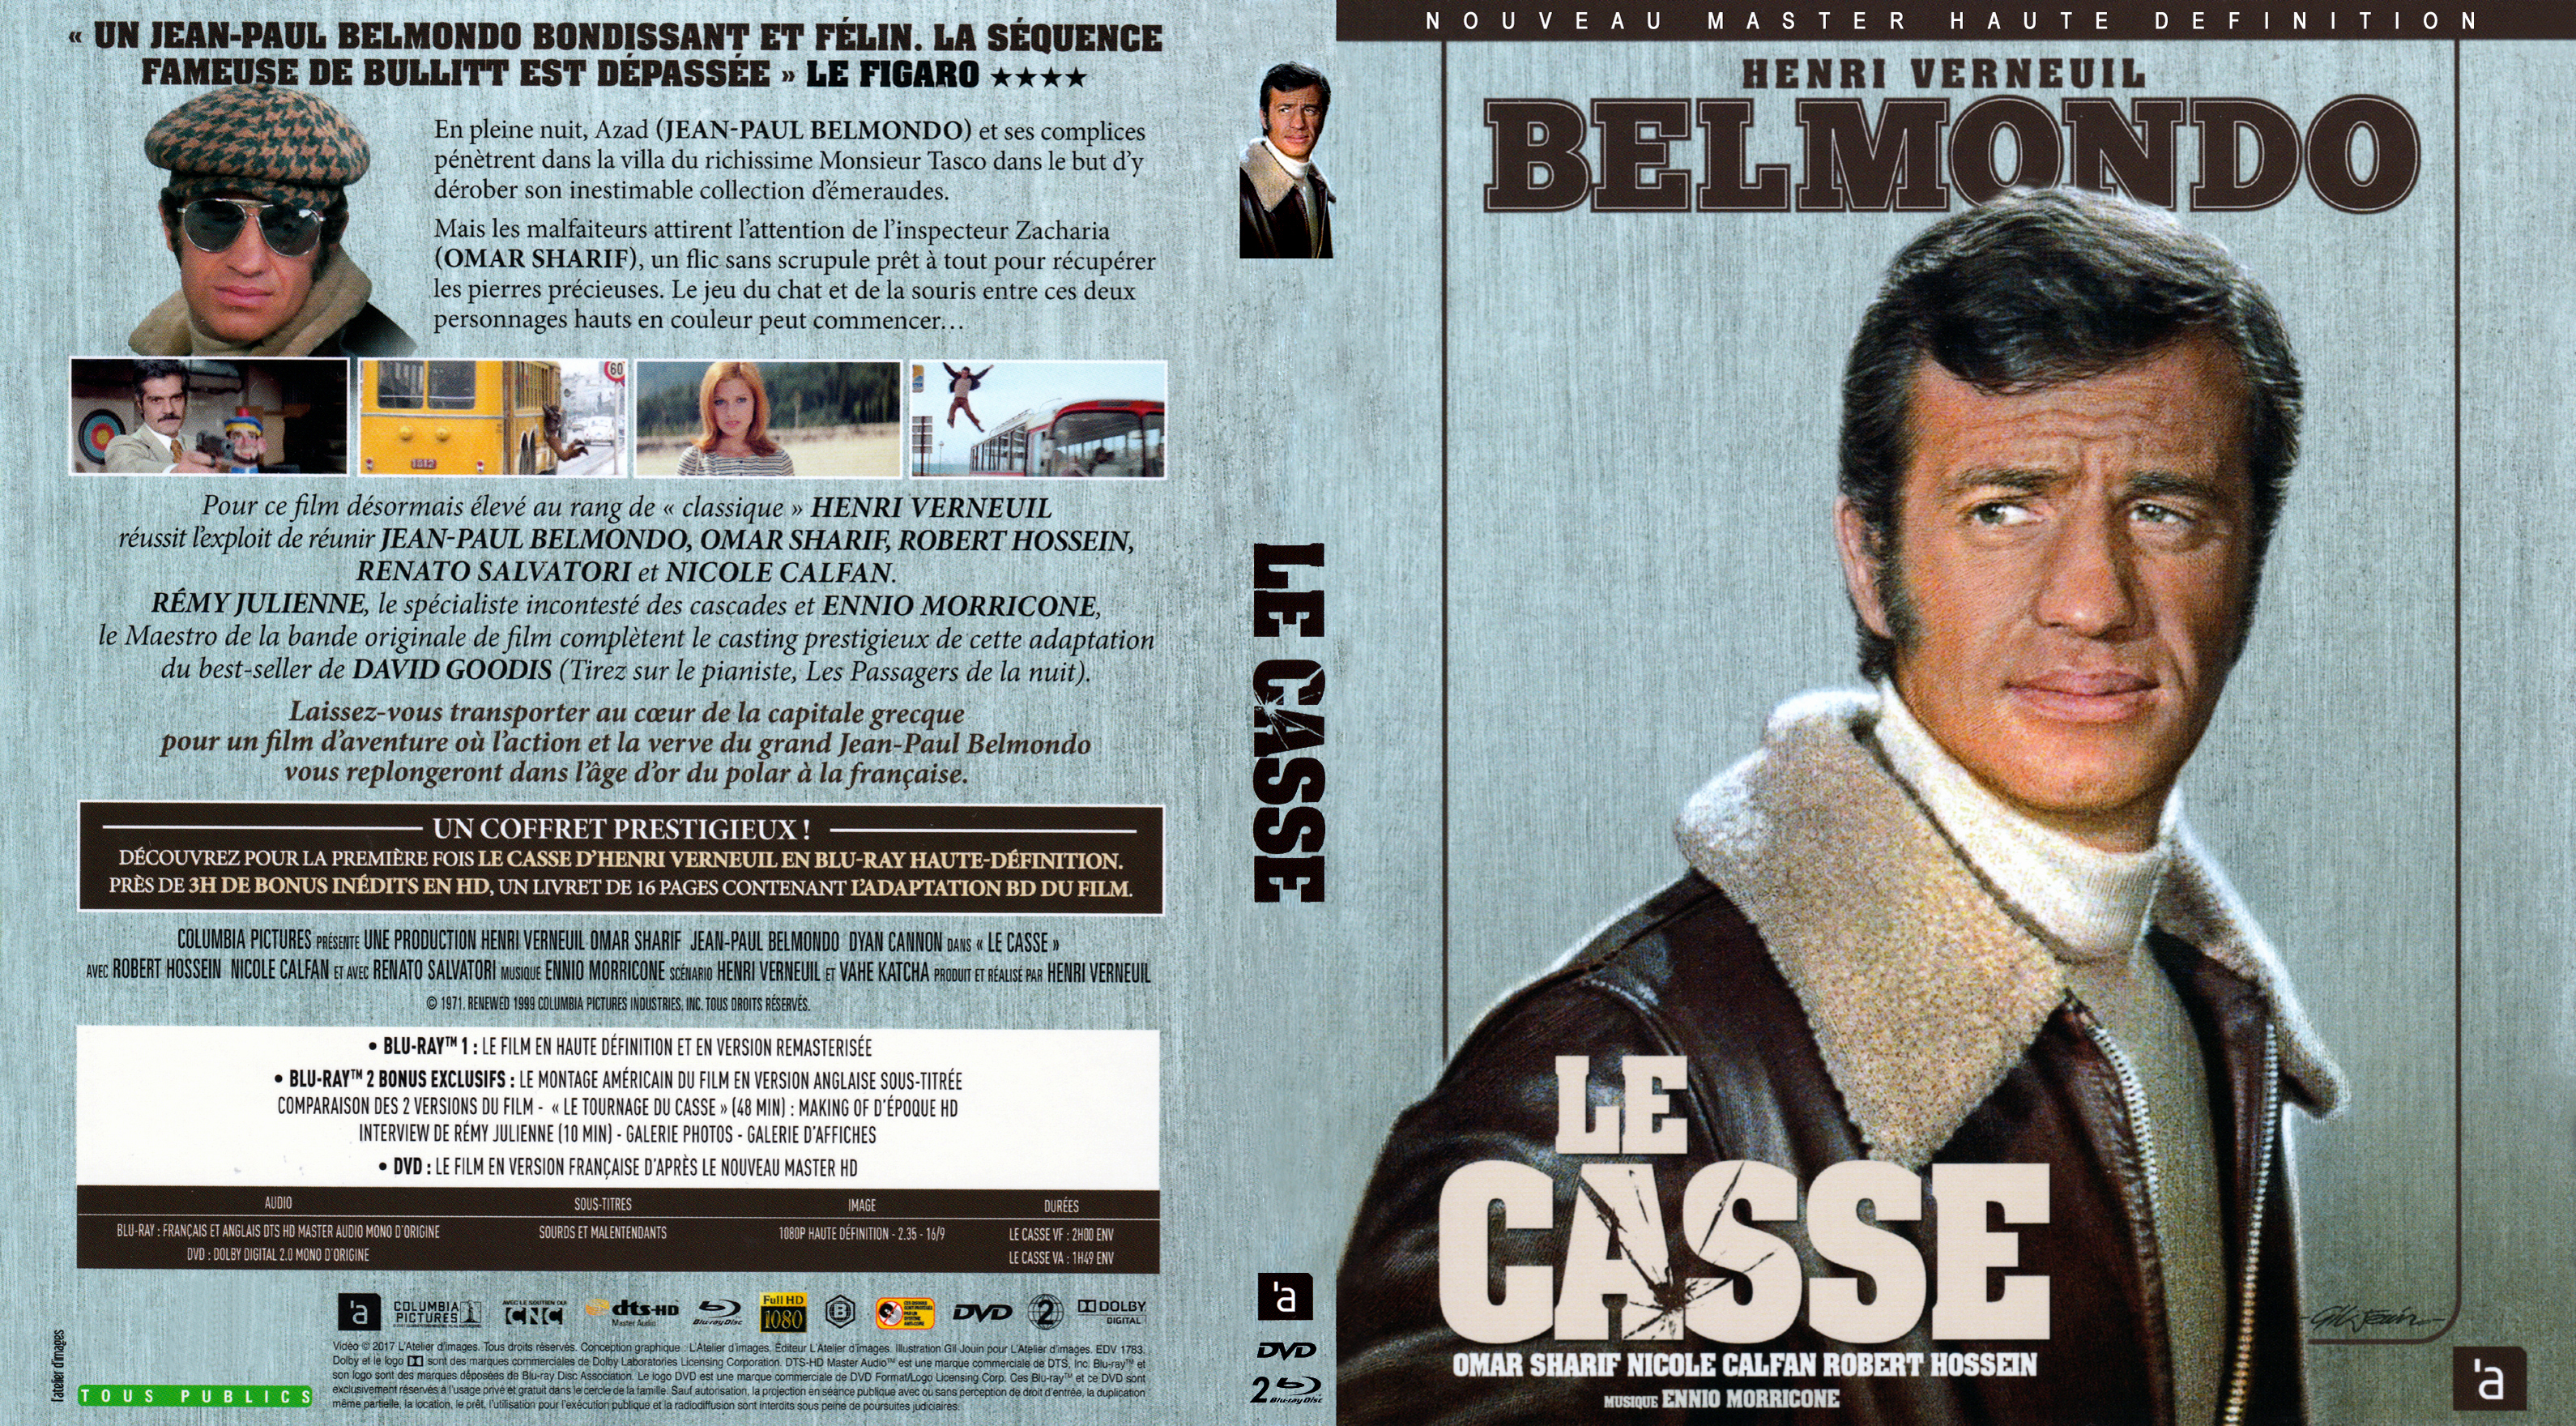 Jaquette DVD Le casse (BLU-RAY)